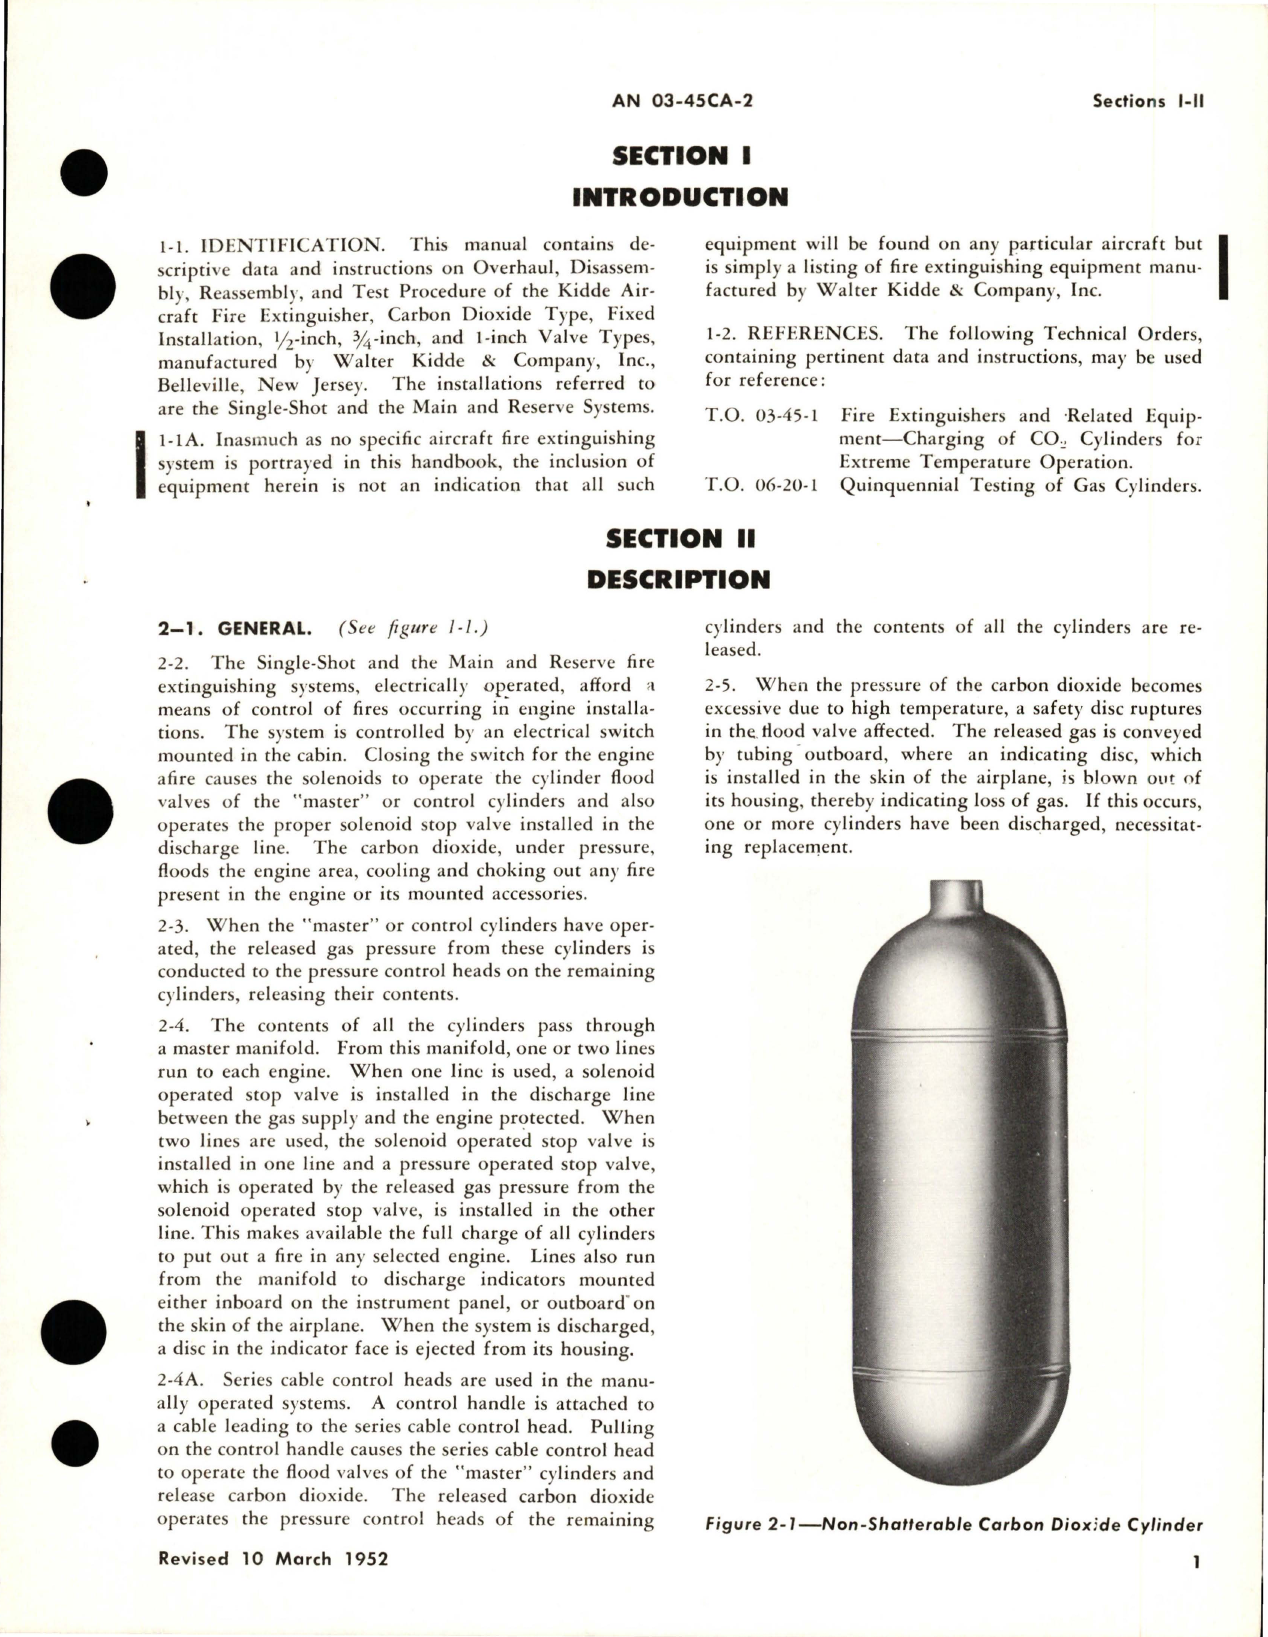 Sample page 7 from AirCorps Library document: Overhaul Instructions for Airborne CO2 Fire Extinguisher System 